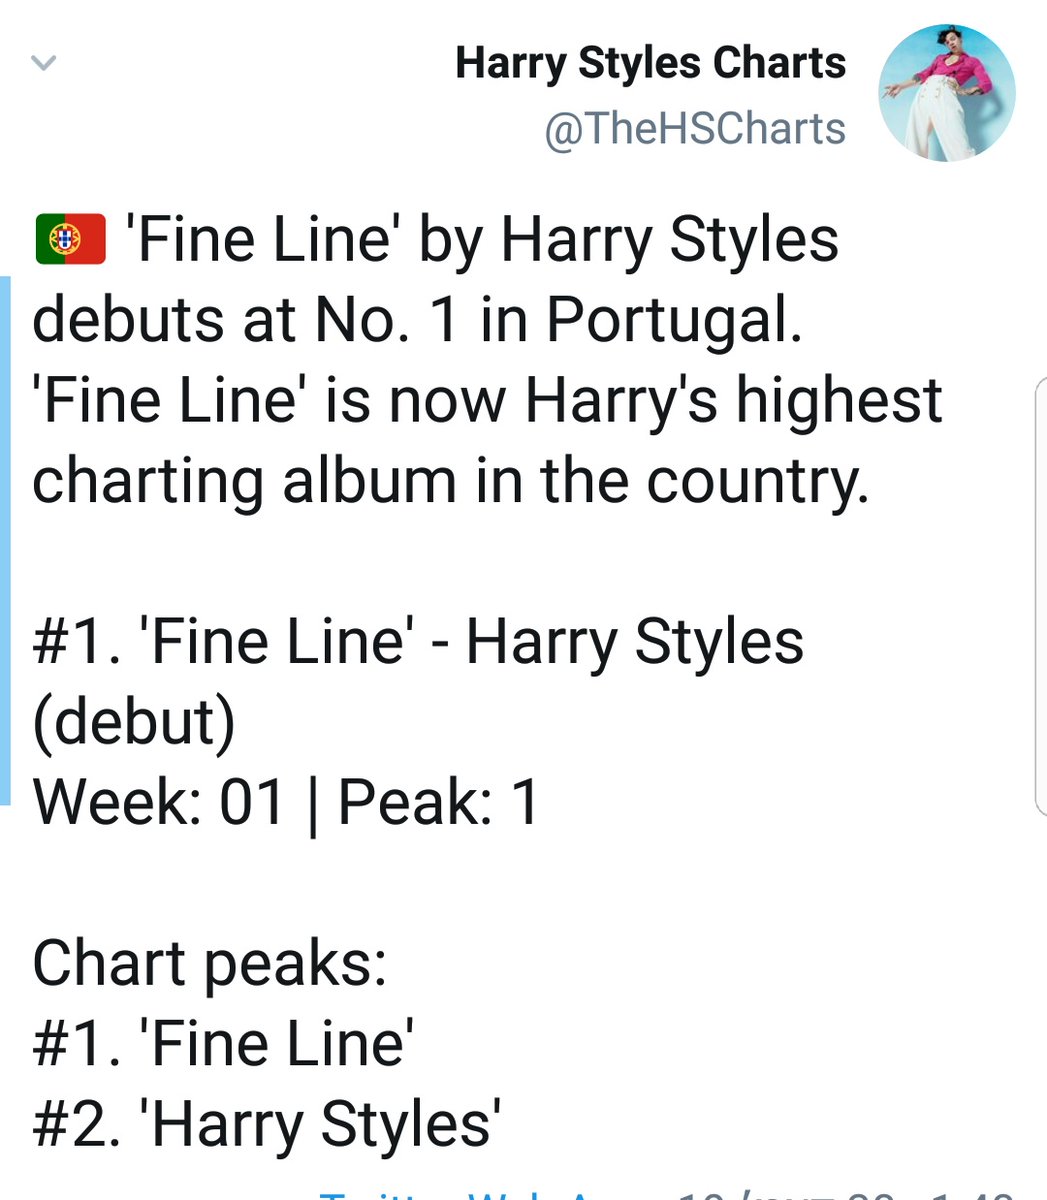 Fine Line out-peaked self titiled